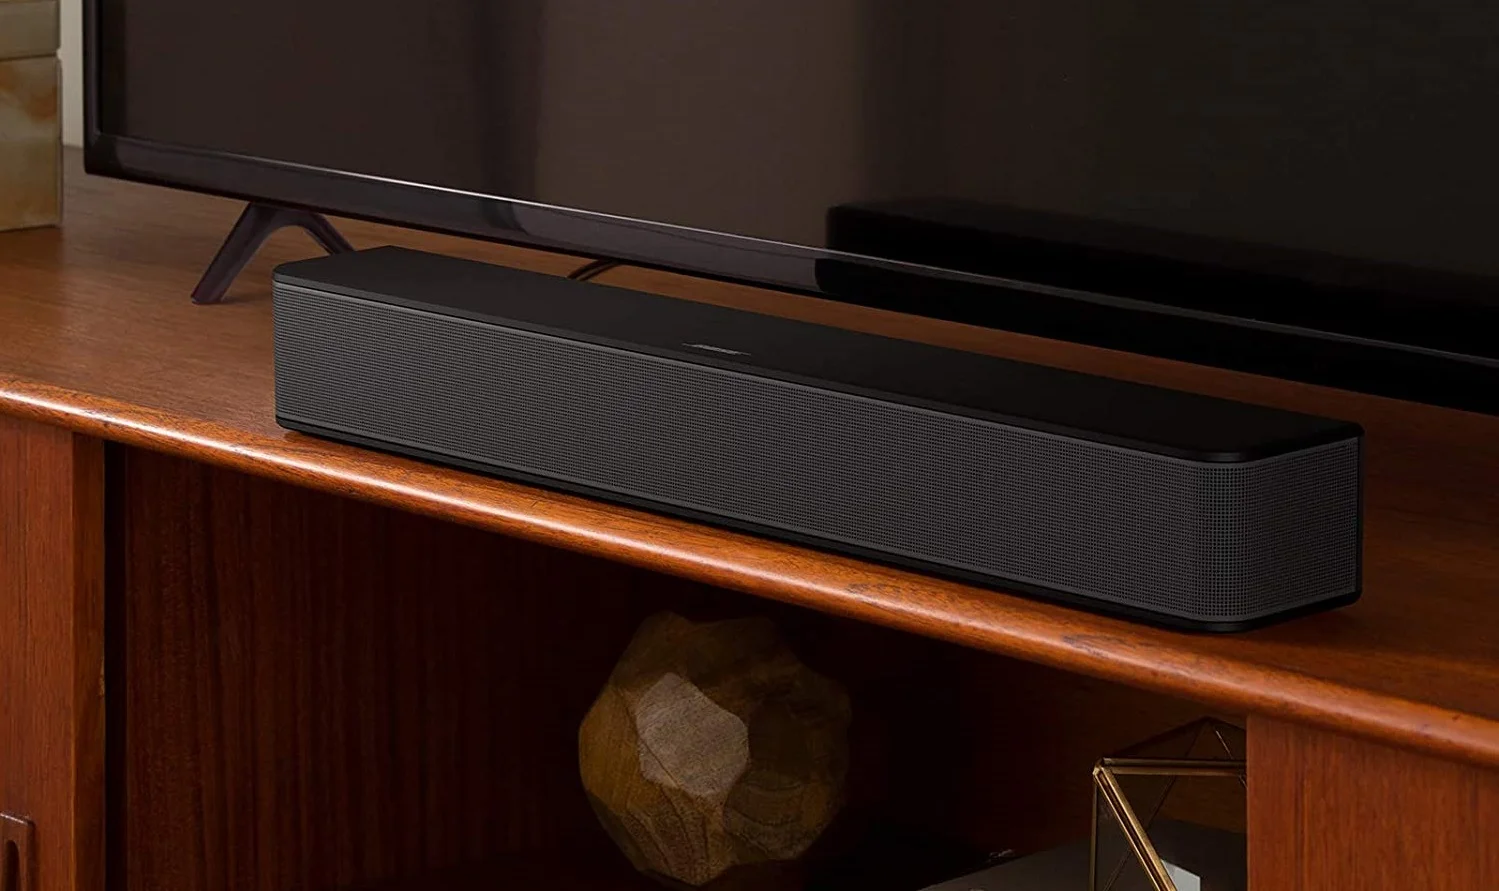 Bose Solo Soundbar Series II placed on a wooden table.